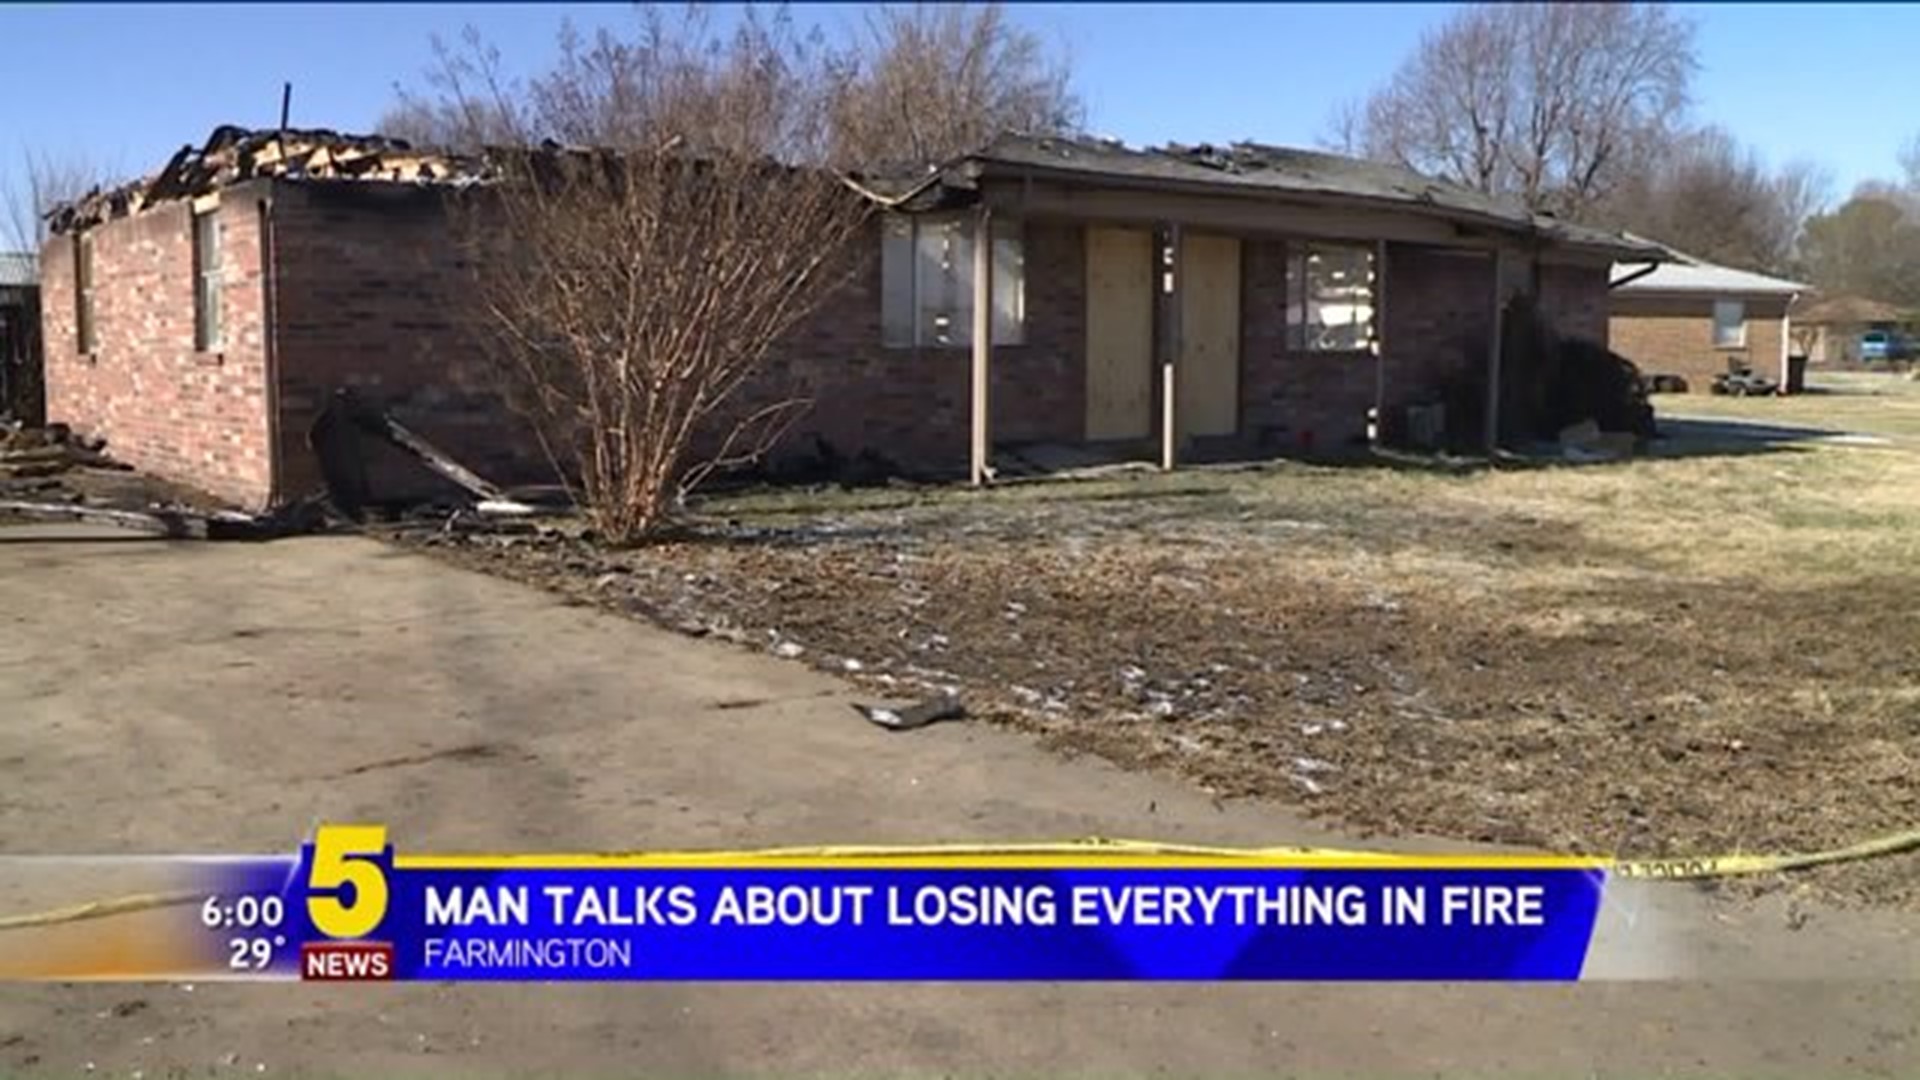 MAN TALKS ABOUT LOSING HOME IN FIRE